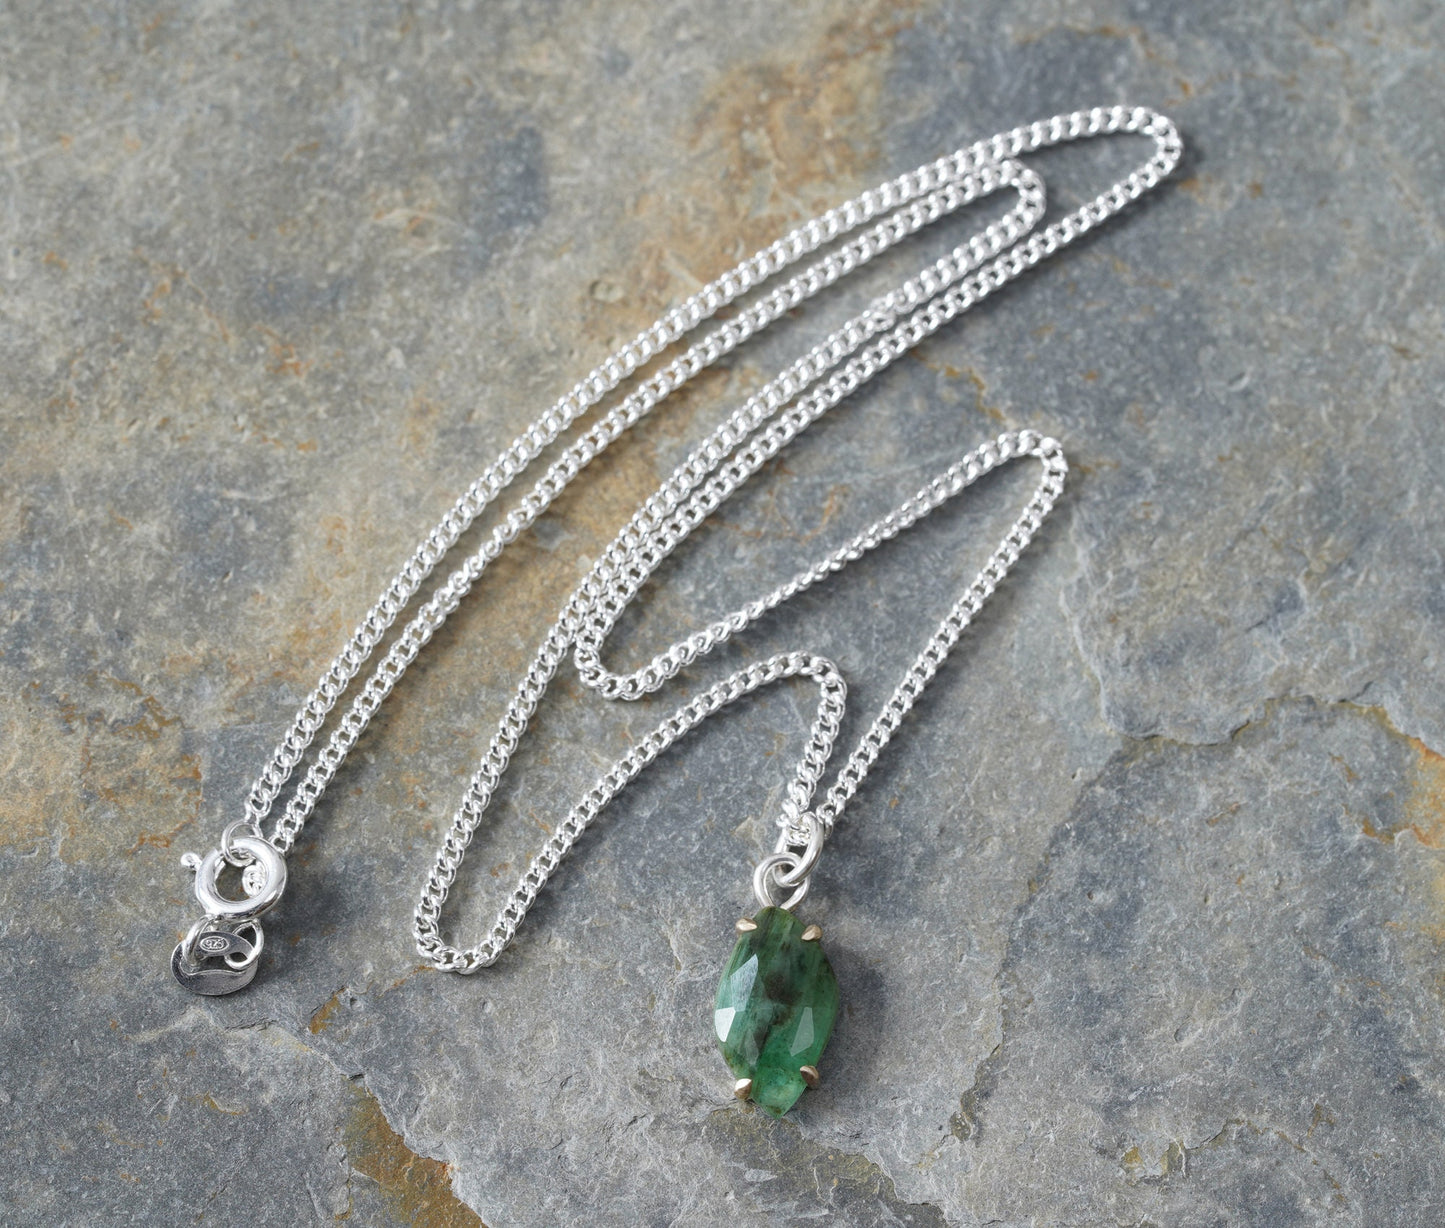 Leaf Shape Emerald Necklace, 1.8ct Emerald Necklace, May Birthstone Necklace